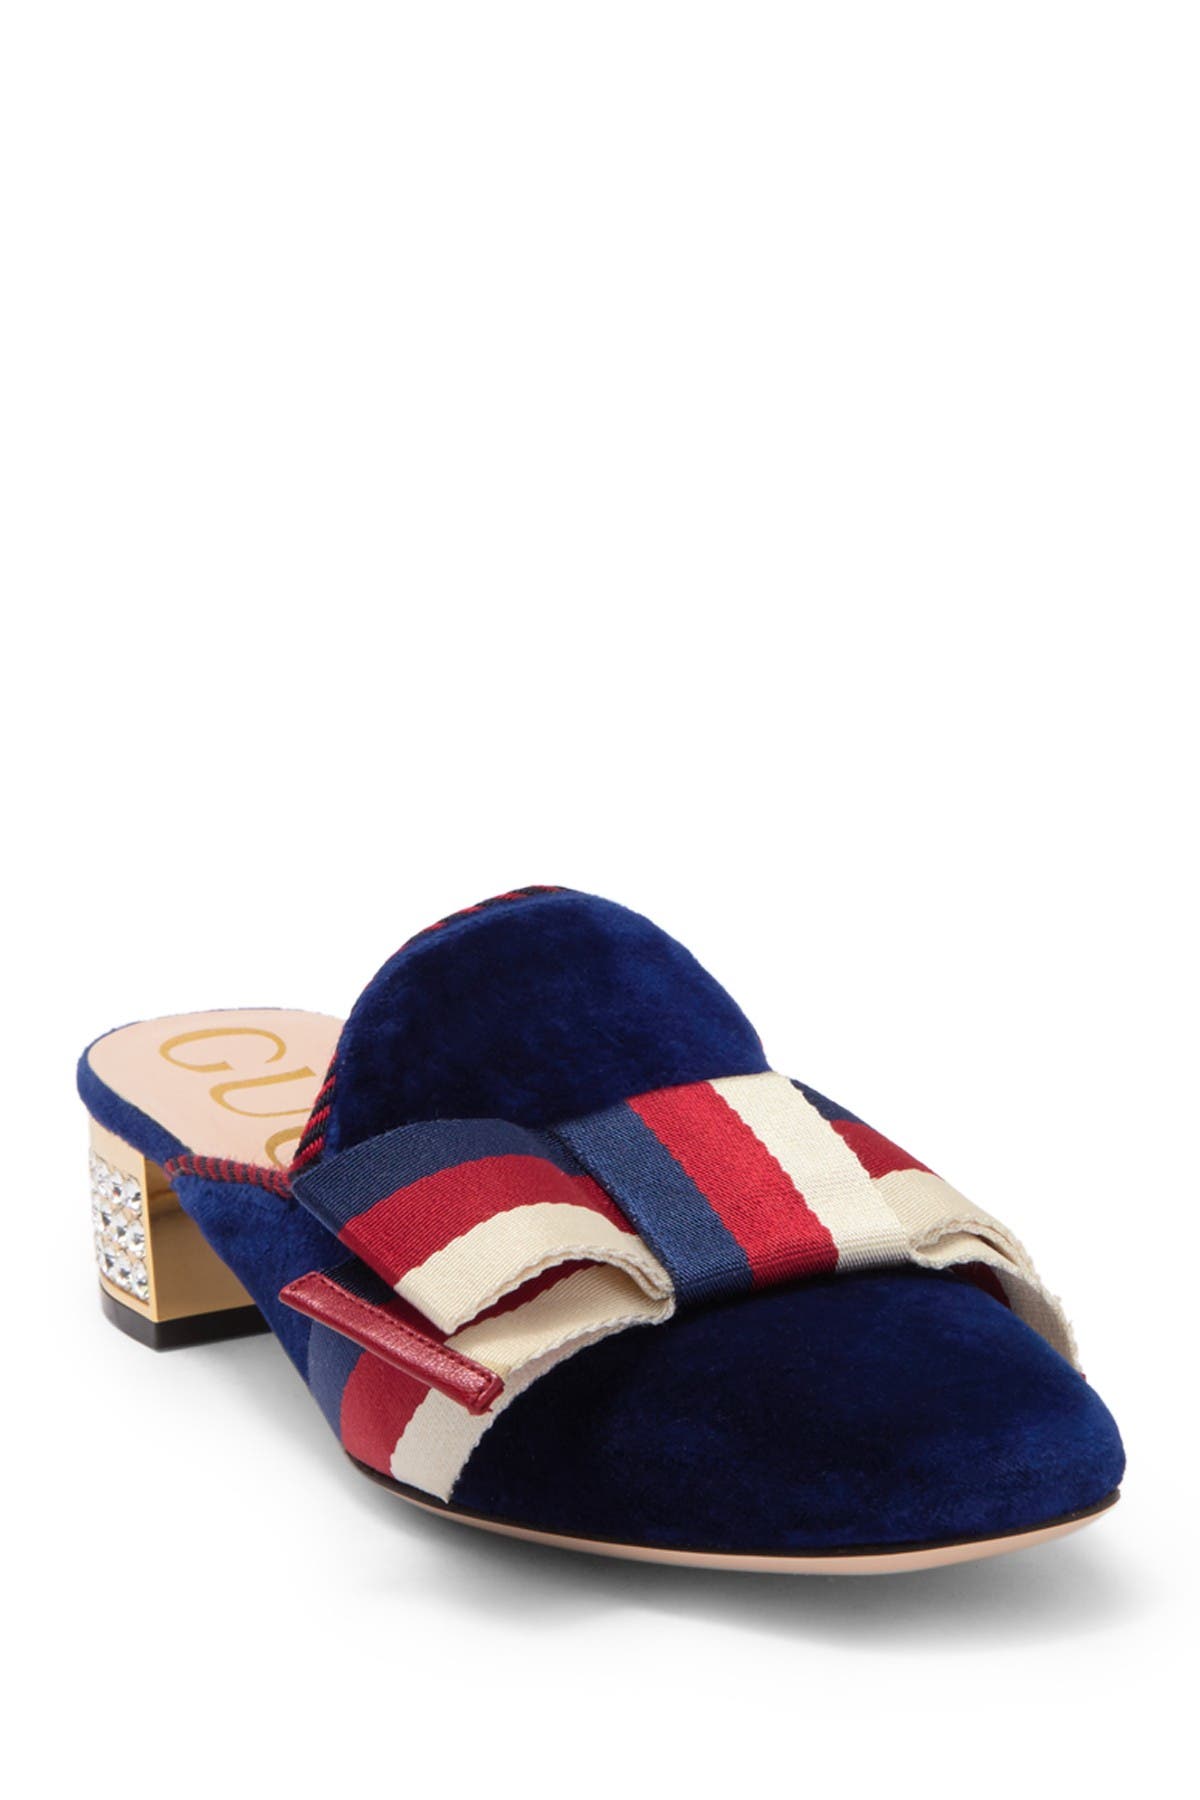 nordstrom gucci mules